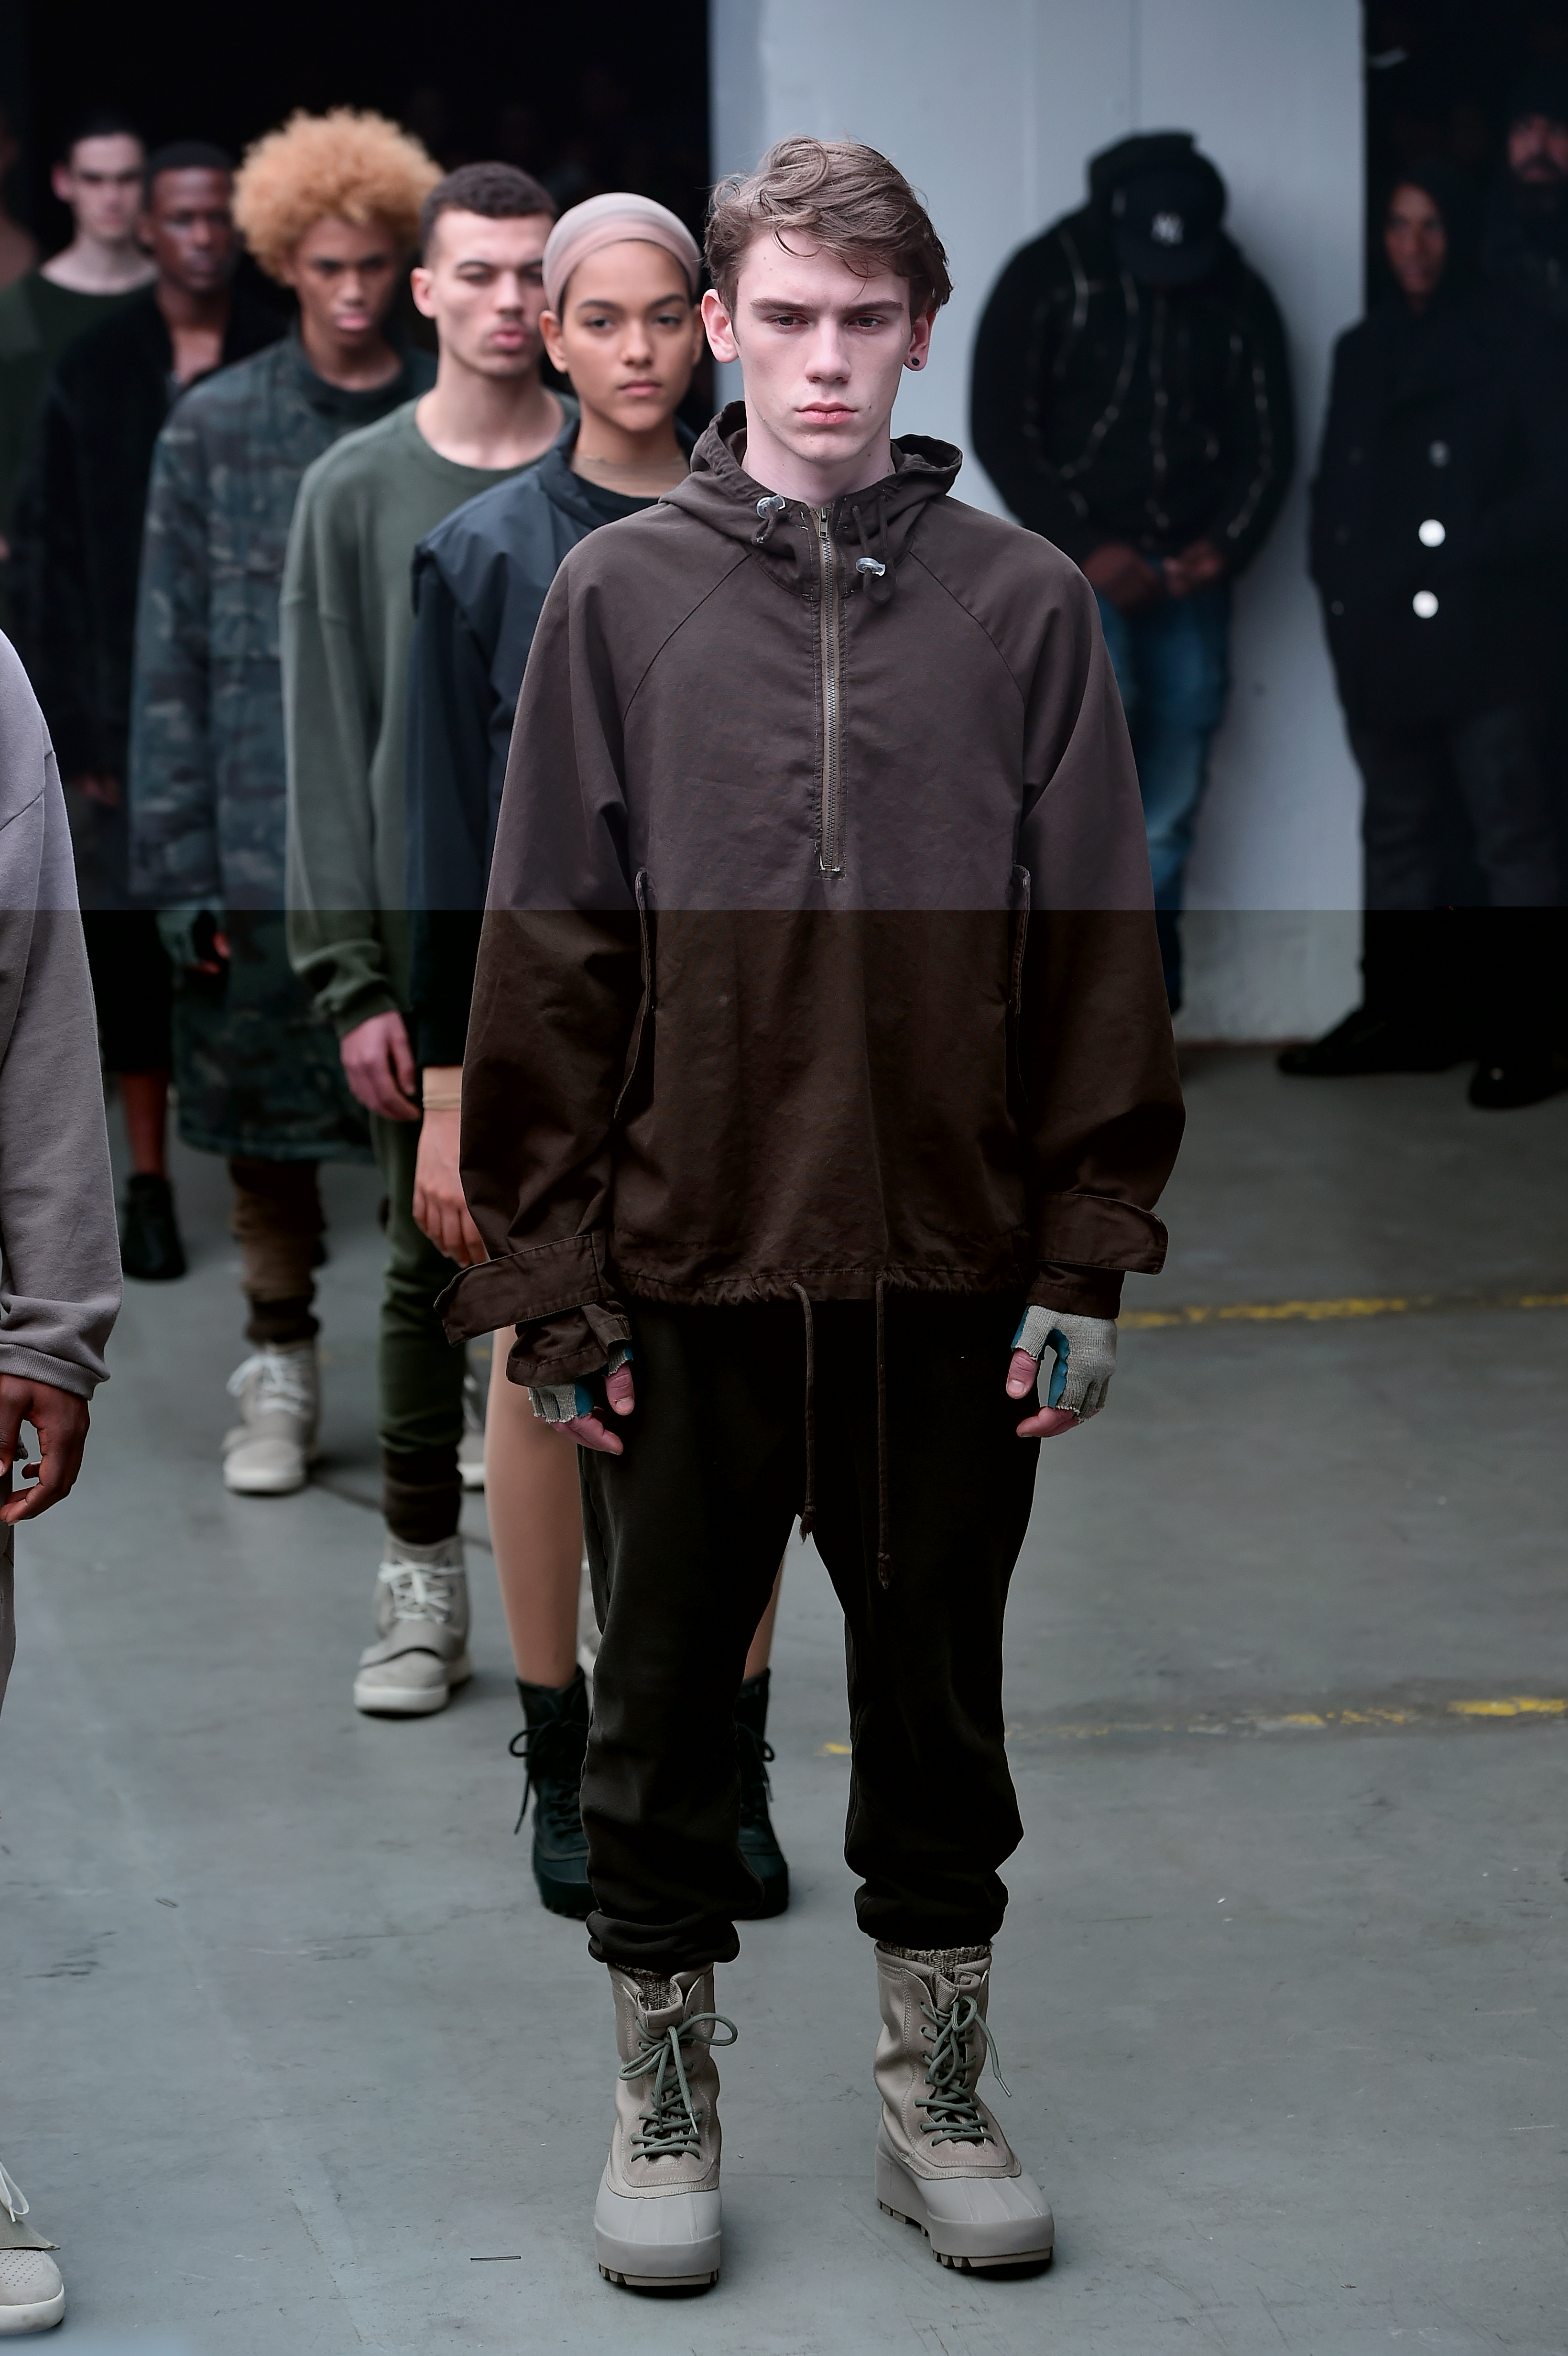 A Detailed Look At Kanye West's 'Yeezy Season 1' Range With Adidas Originals ...3280 x 4928